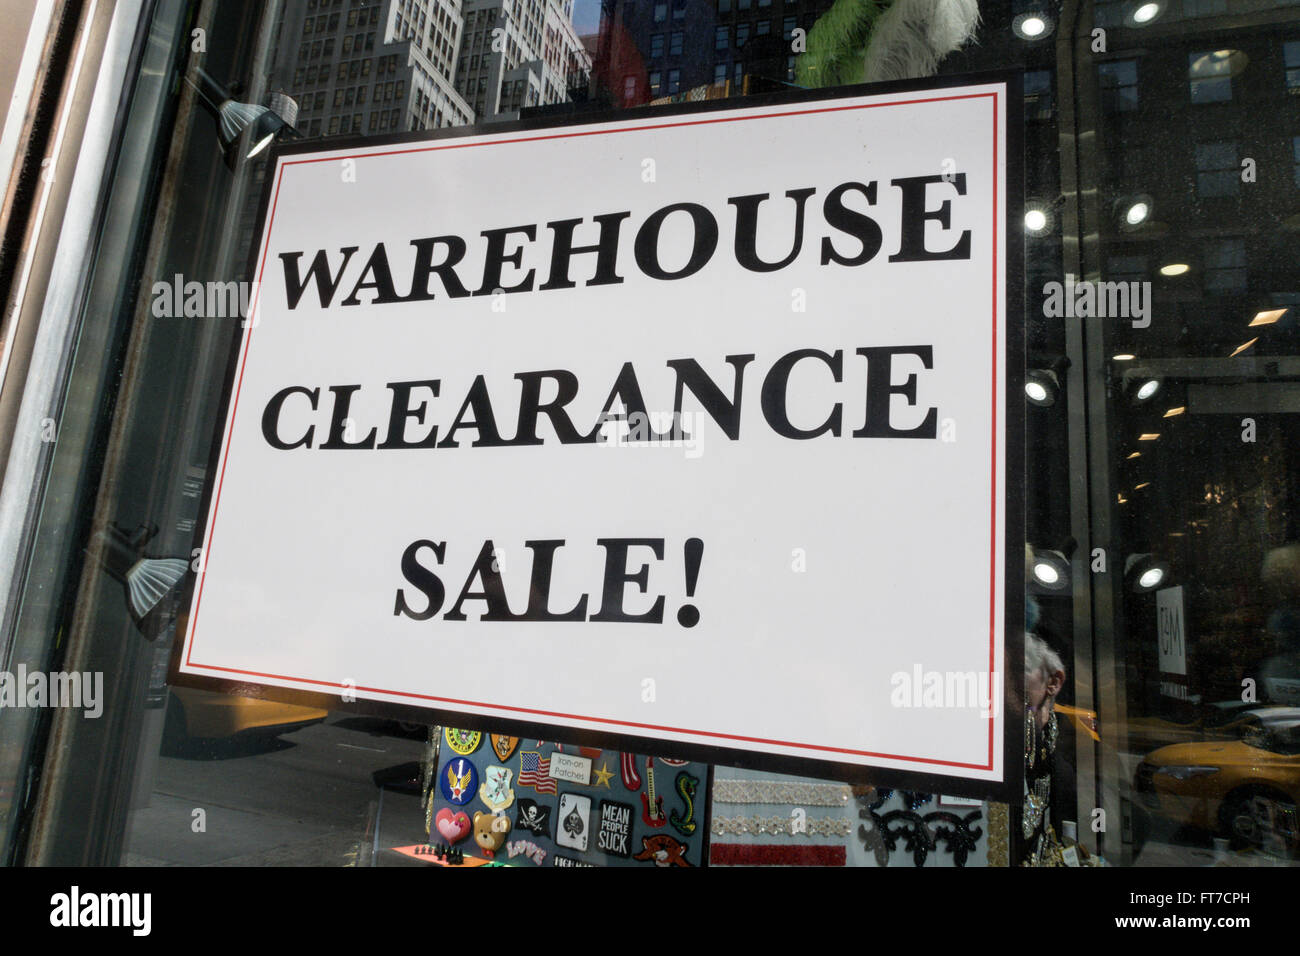 https://c8.alamy.com/comp/FT7CPH/warehouse-clearance-sale-sign-on-store-window-nyc-usa-FT7CPH.jpg